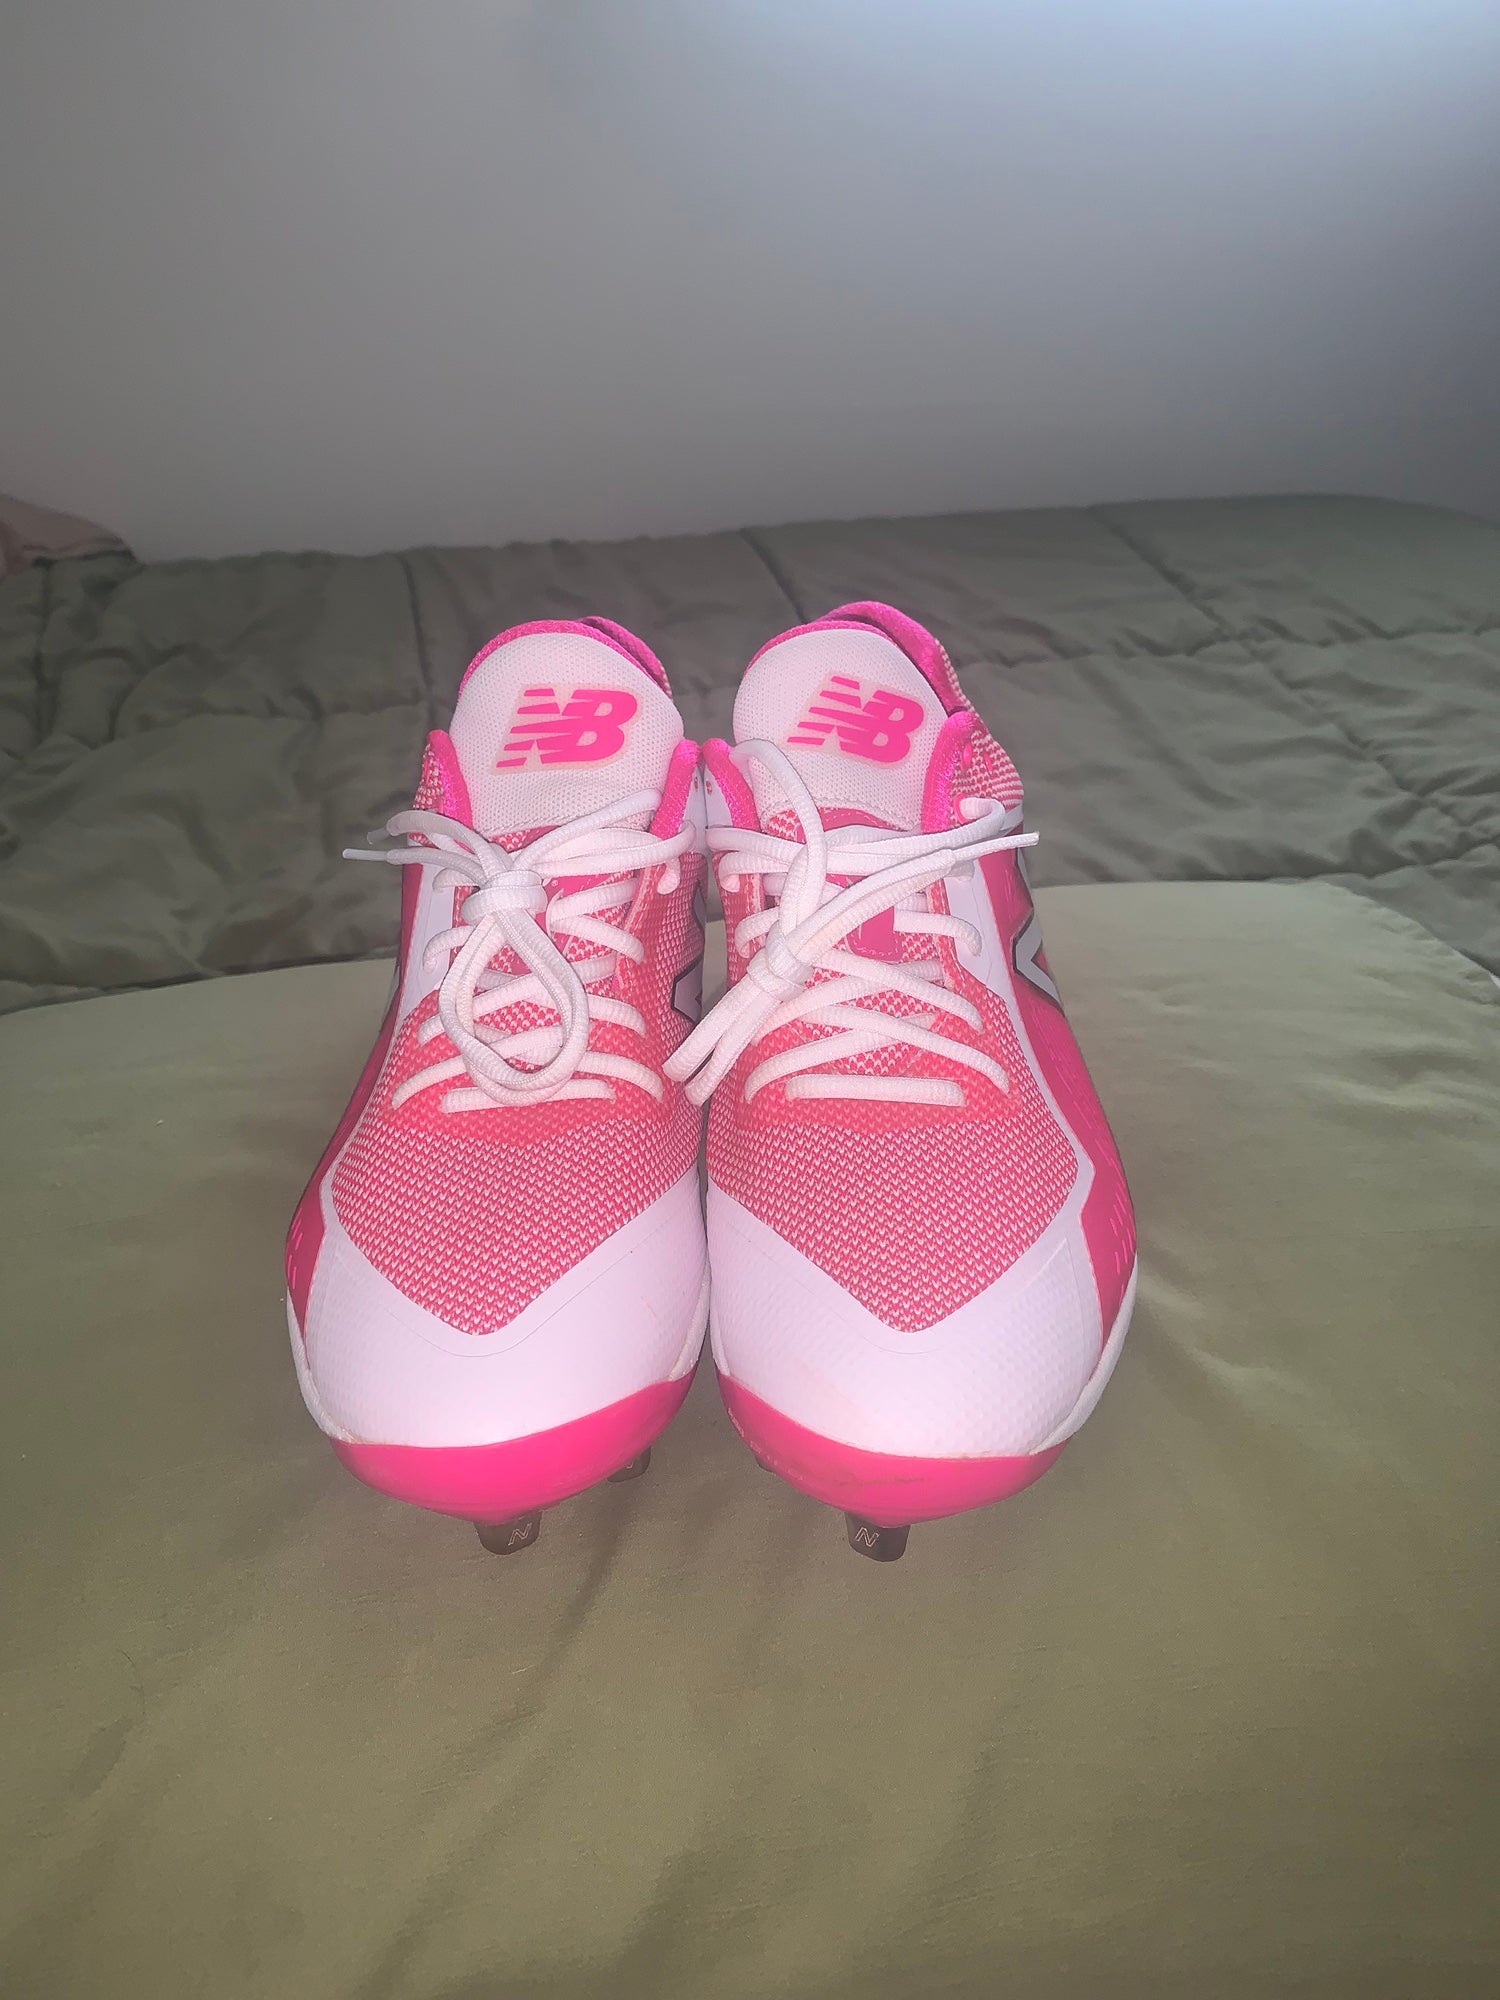 New Balance Mothers Day 4040v5 Cleats And Turf Shoes in Pink for Men